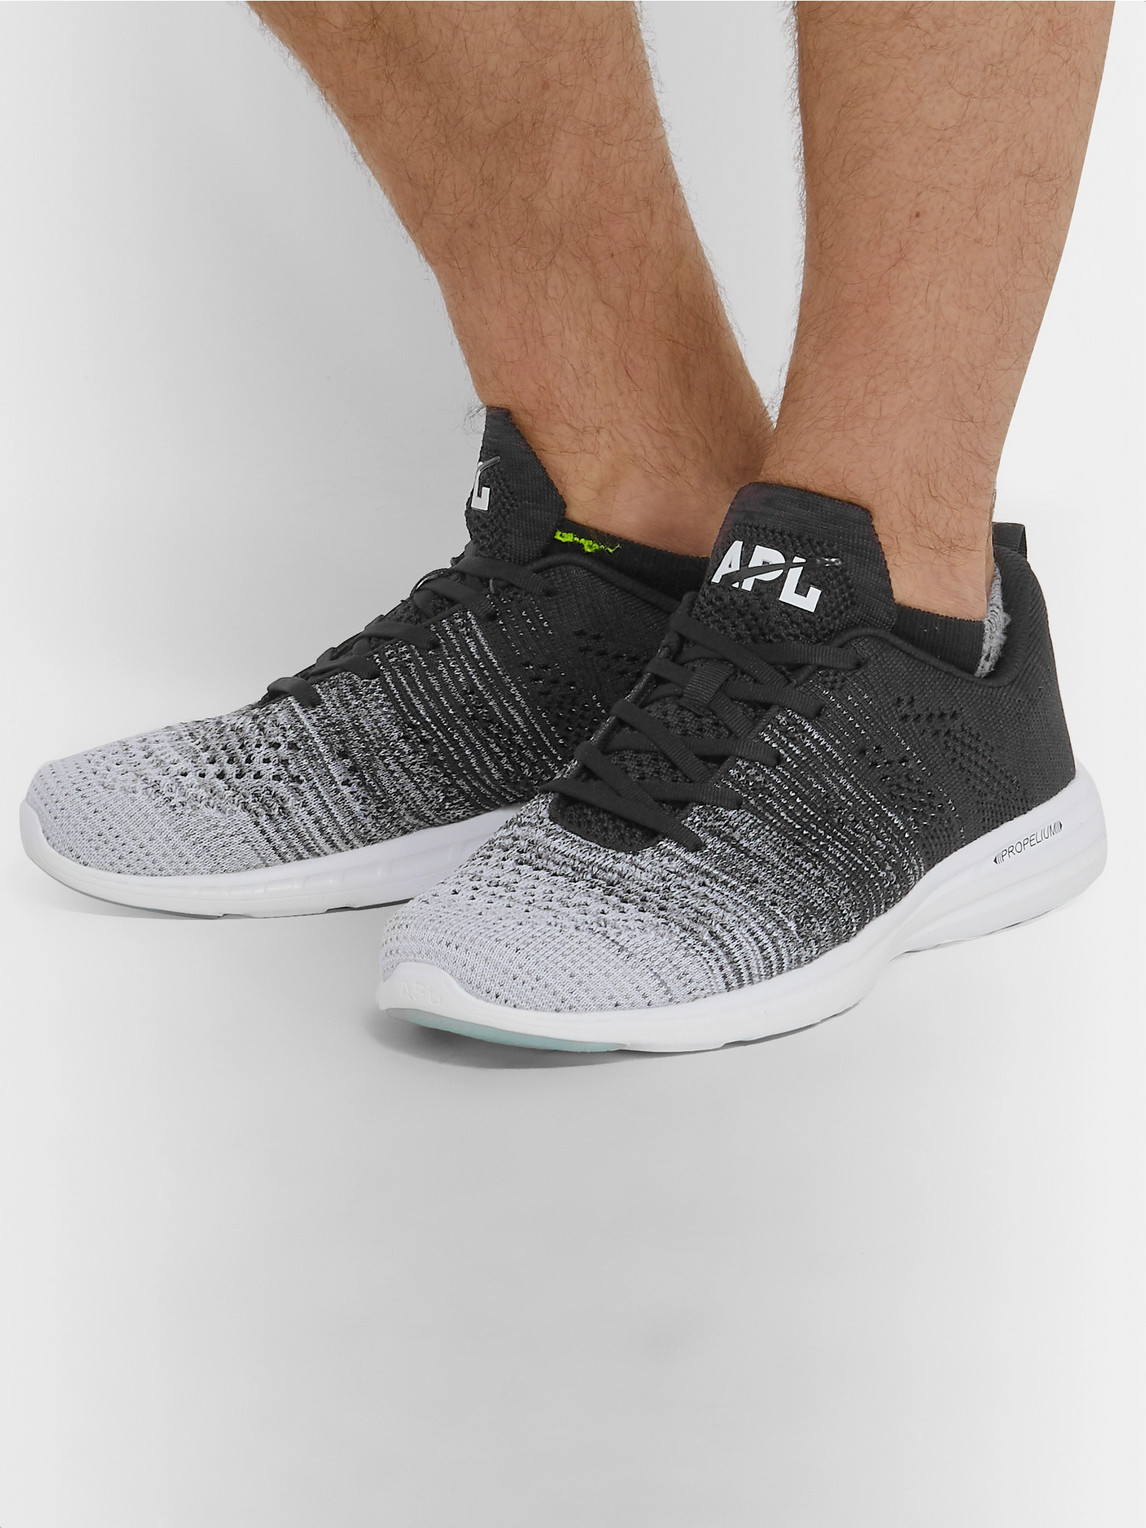 Shop Apl Athletic Propulsion Labs Pro Techloom Running Sneakers In Gray